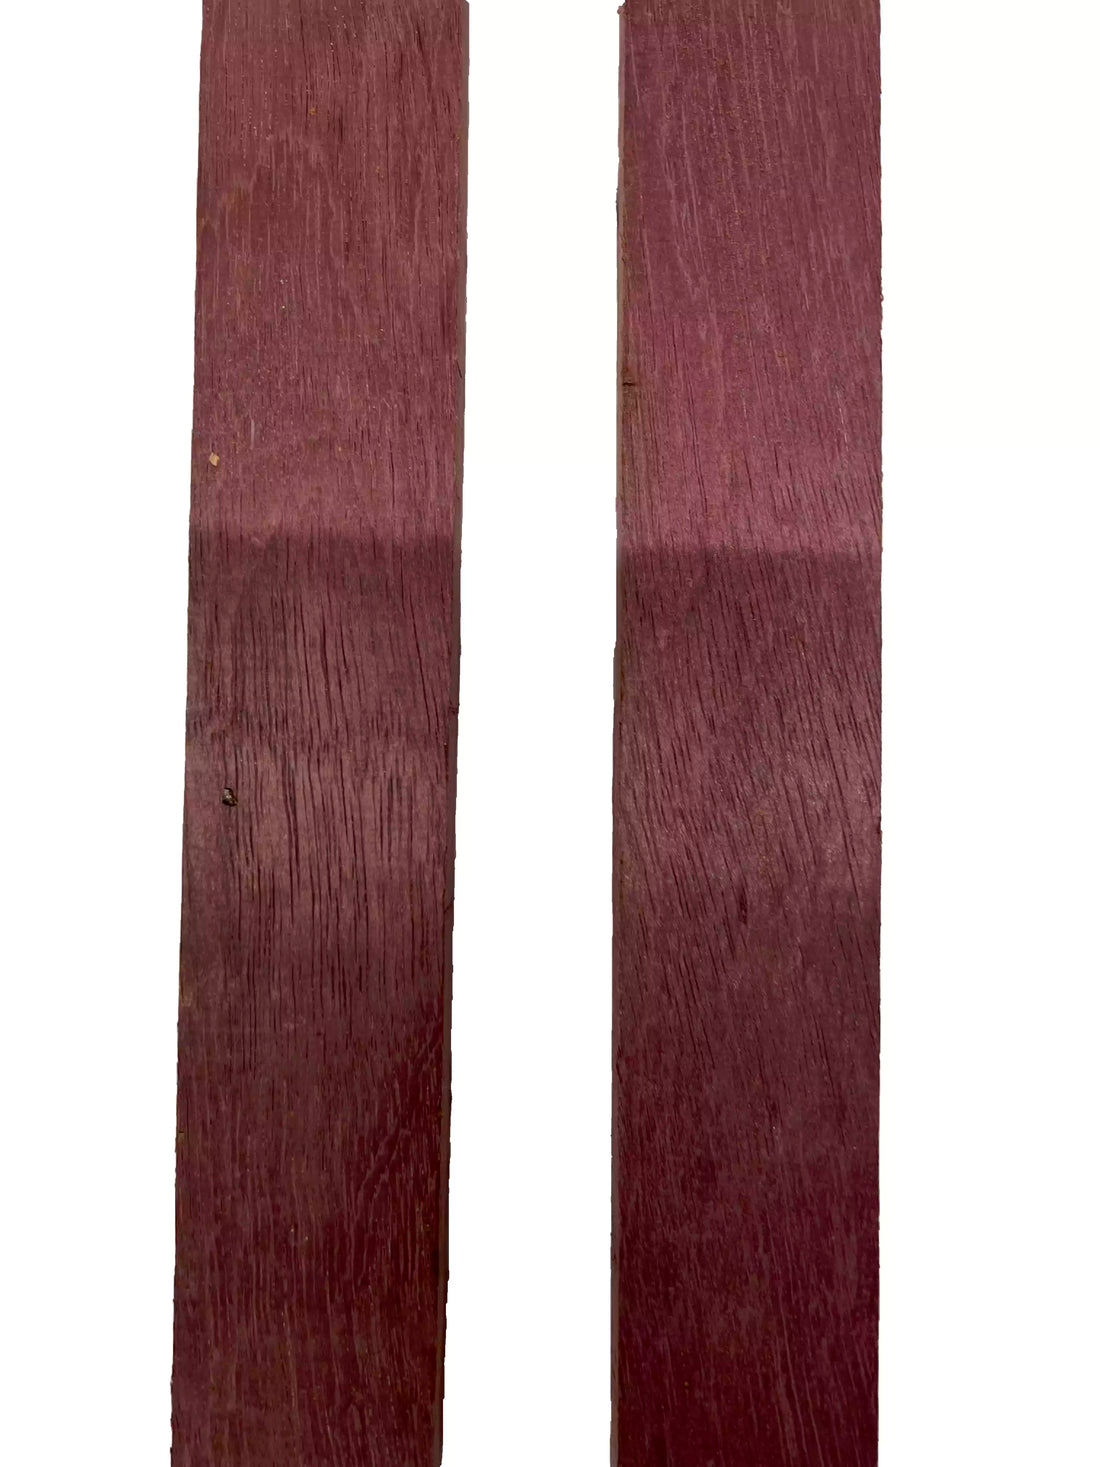 Pack of 2, Purpleheart Thin Stock Three-Dimensional Lumber Board Wood Blank 24&quot; x 1-3/4&quot; x 3/4&quot; 